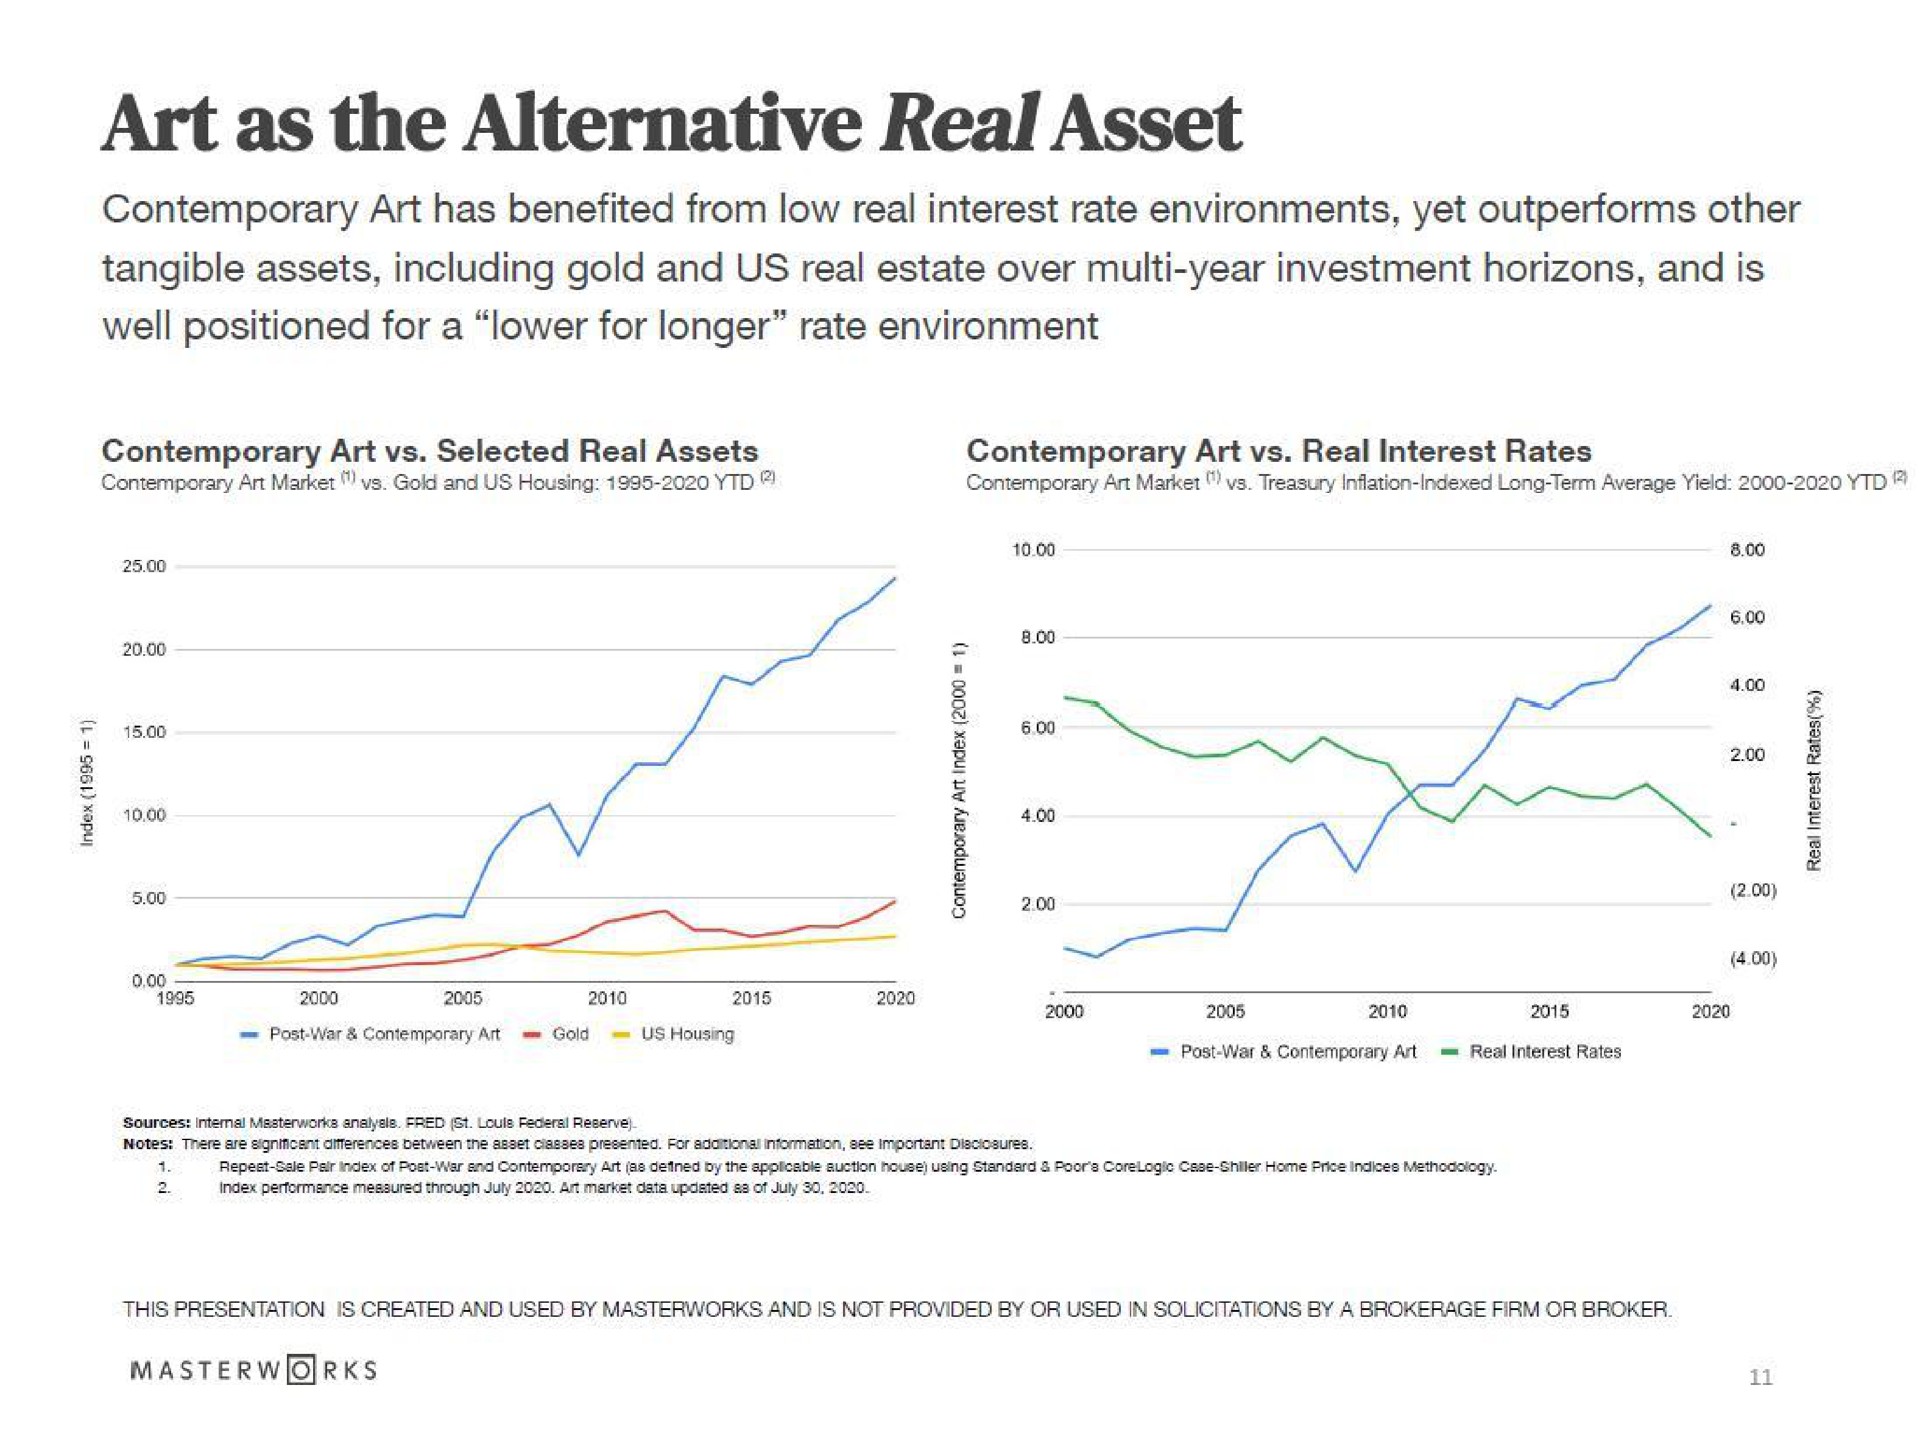 art as the alternative real asset contemporary art has benefited from low real interest rate environments yet outperforms other tangible assets including gold and us real estate over year investment horizons and is well positioned for a lower for longer rate environment | Masterworks